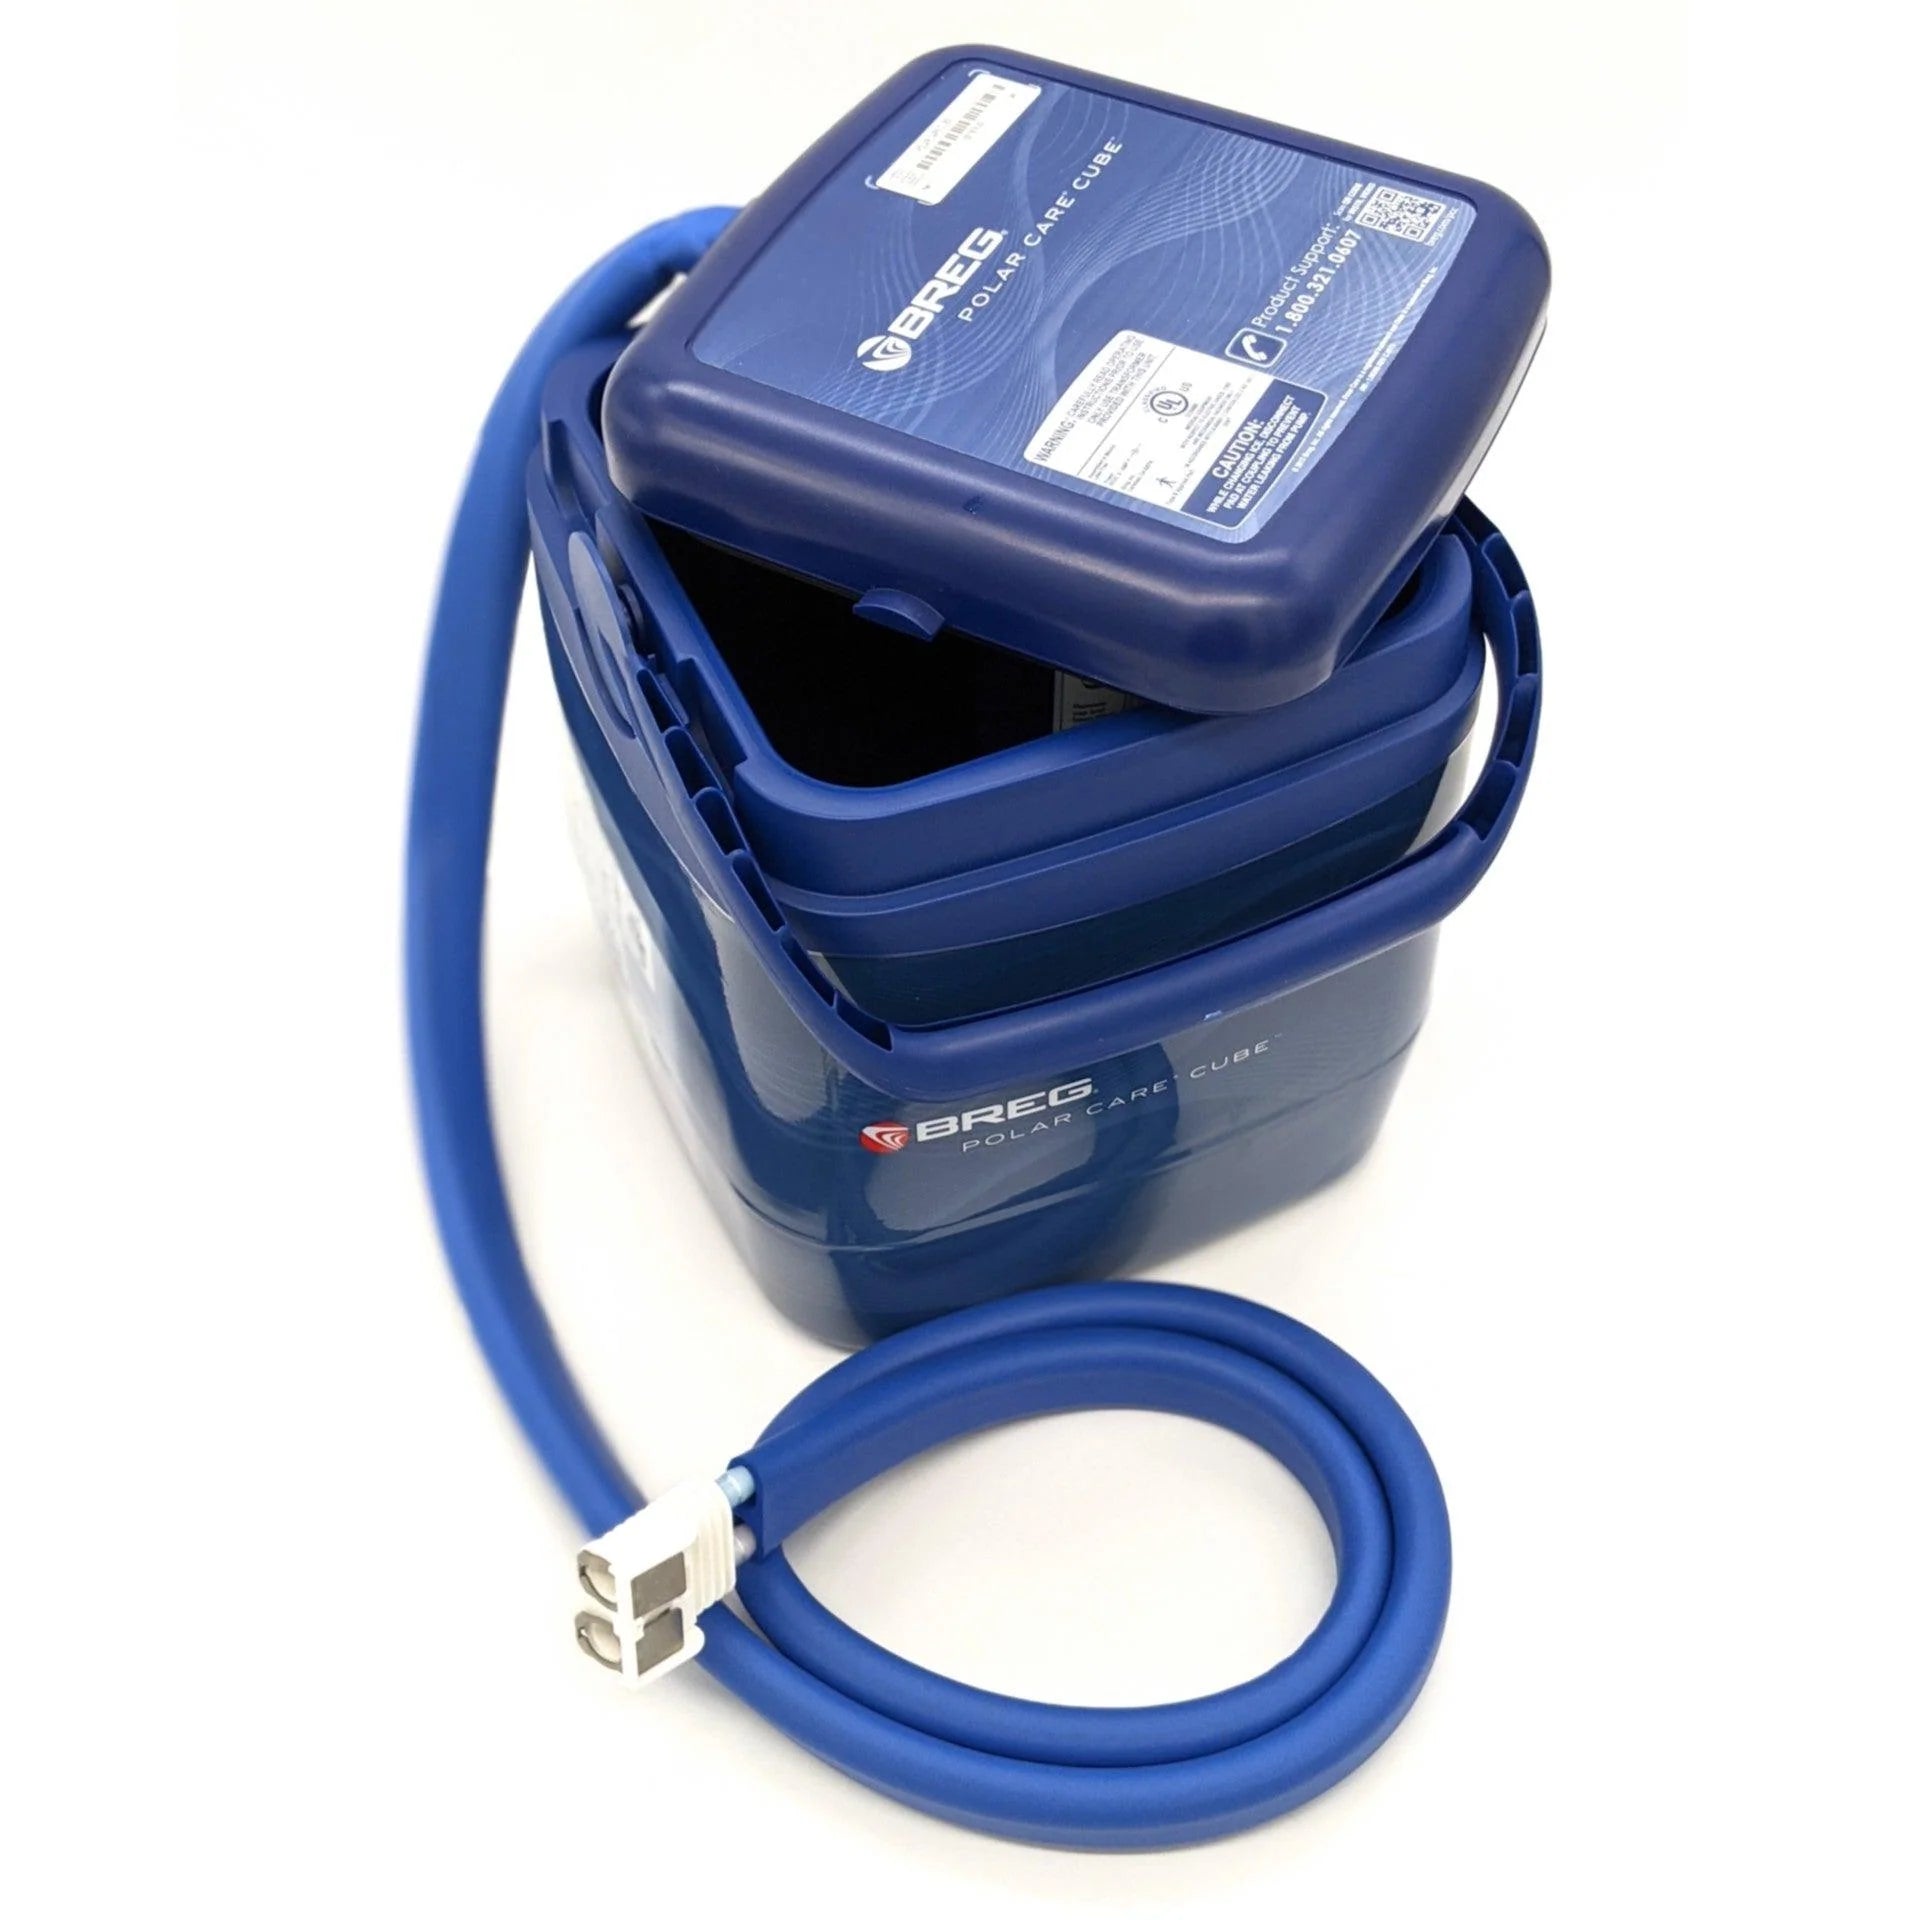 Breg - Breg Polar Care Cube Cold Therapy System - SourceColdTherapy